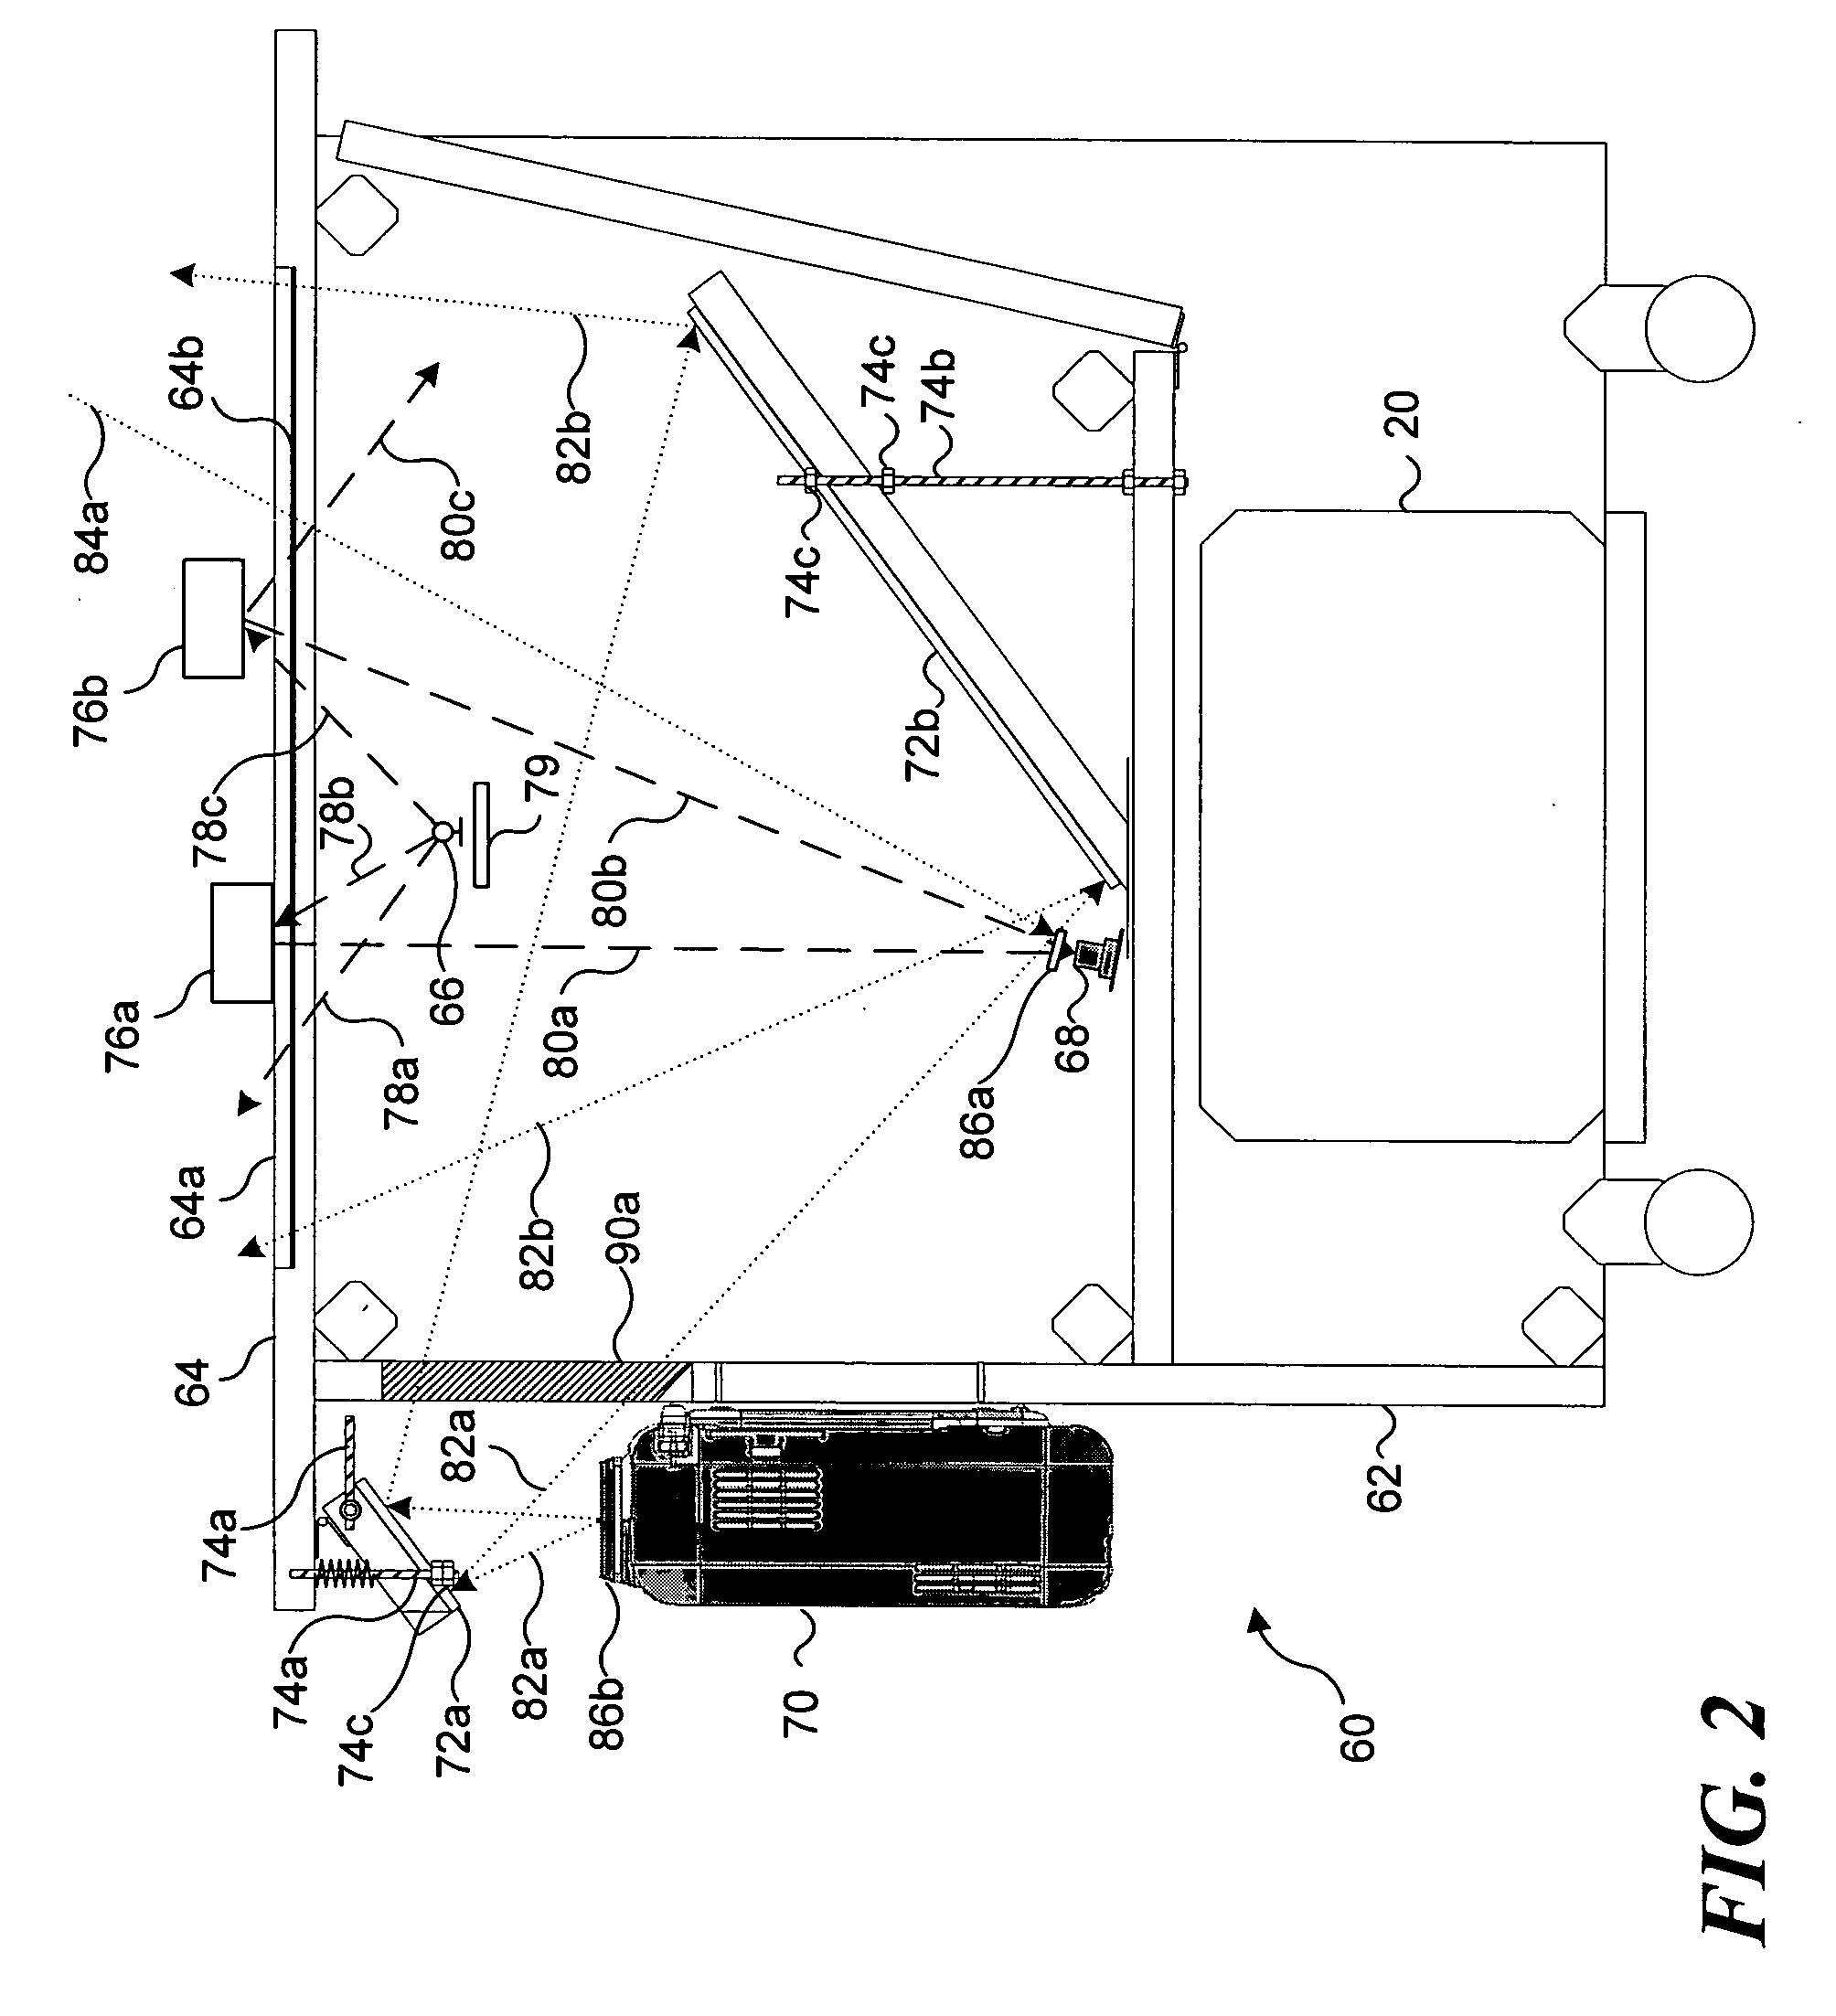 Restricting the display of information with a physical object